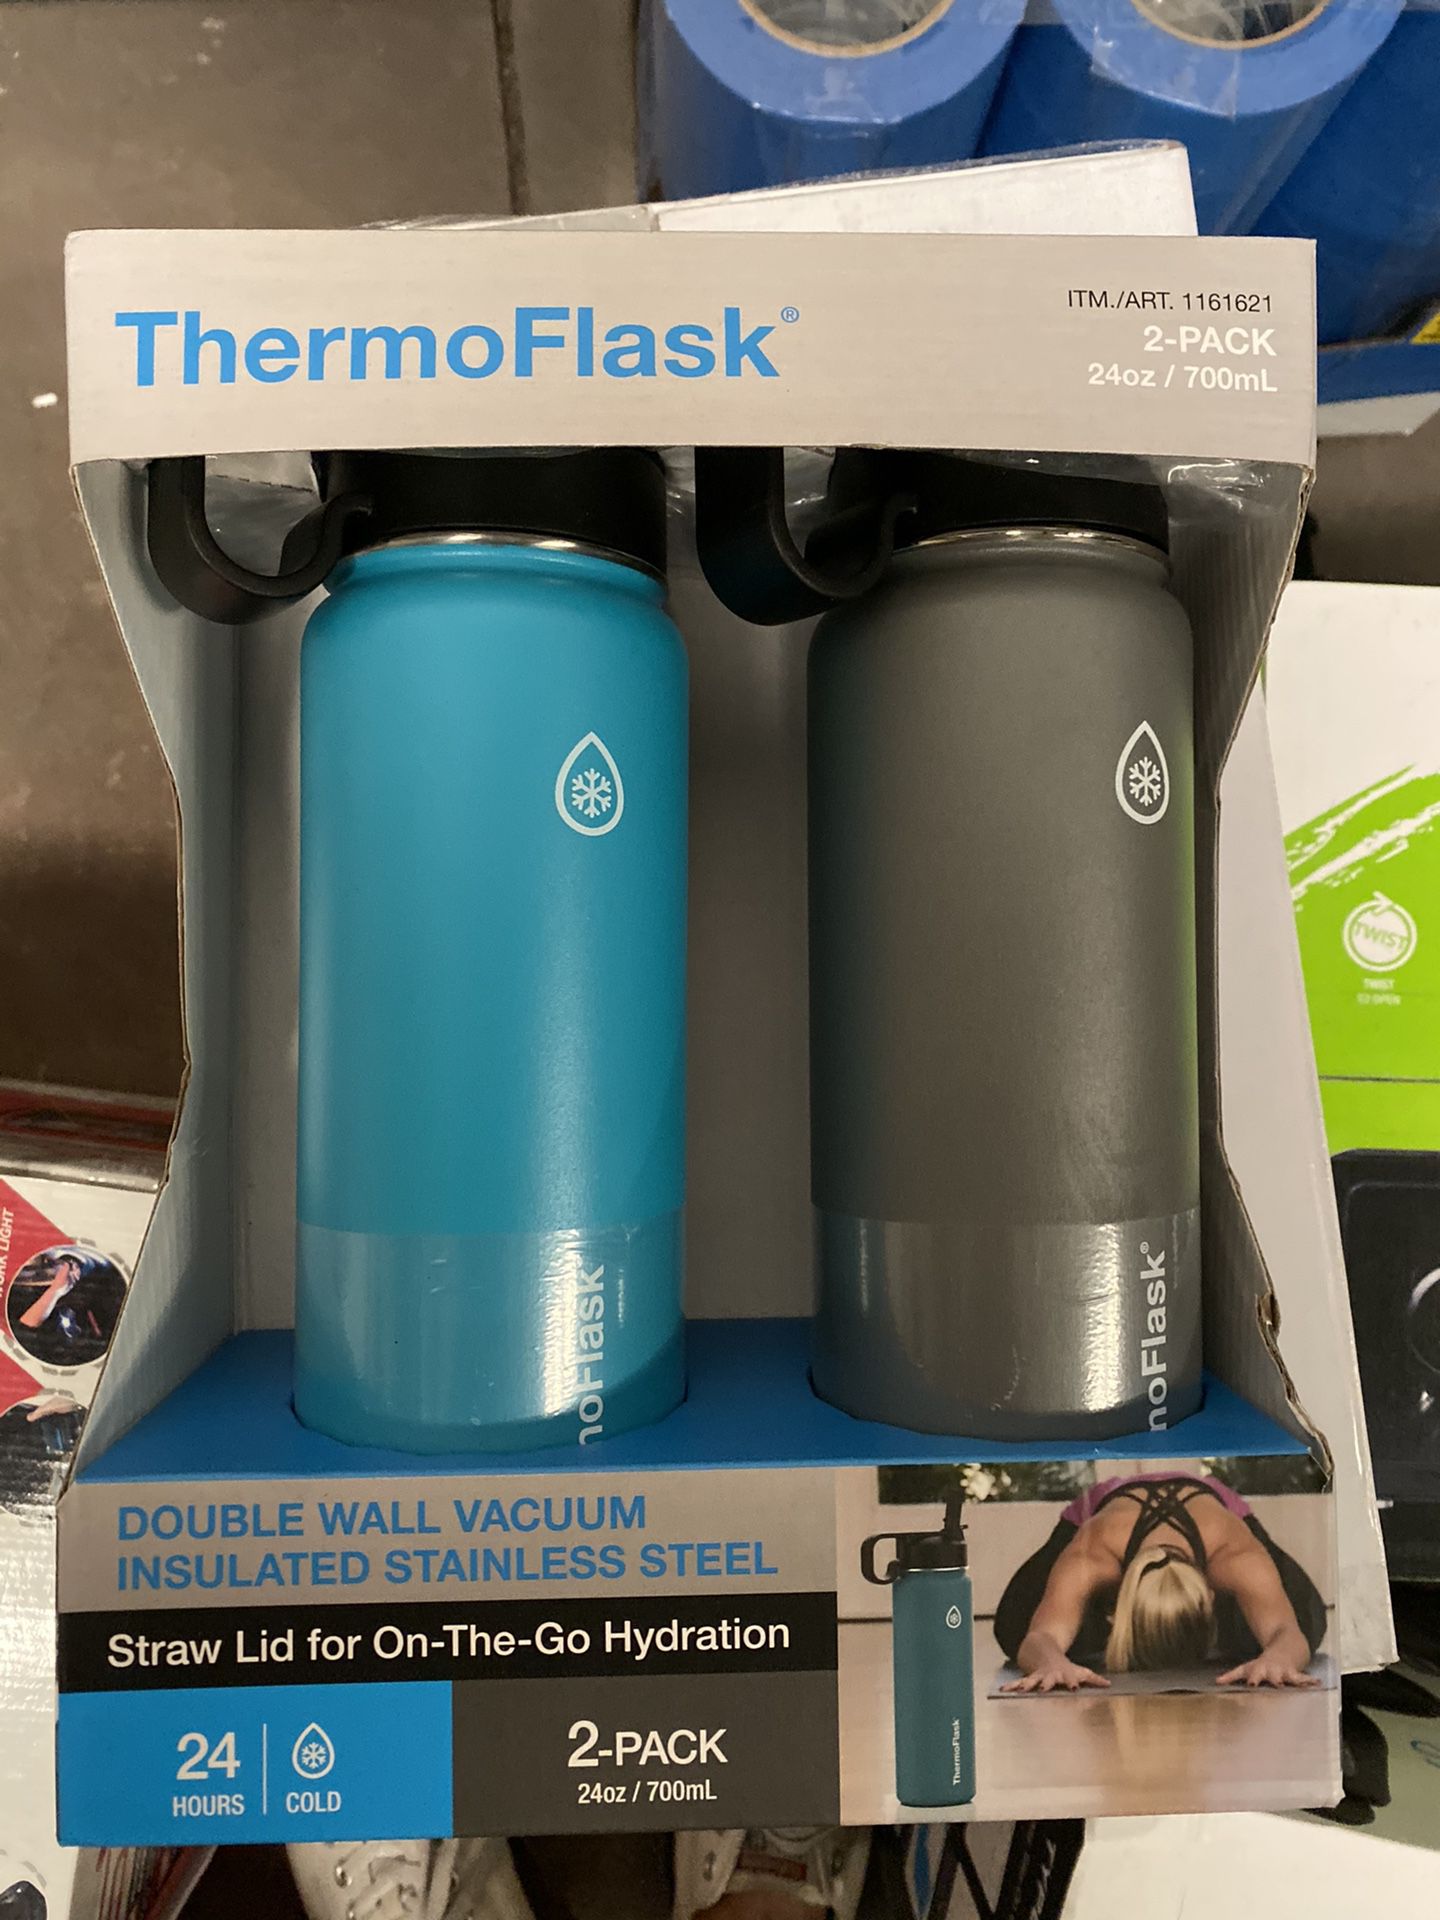 ThermoFlask